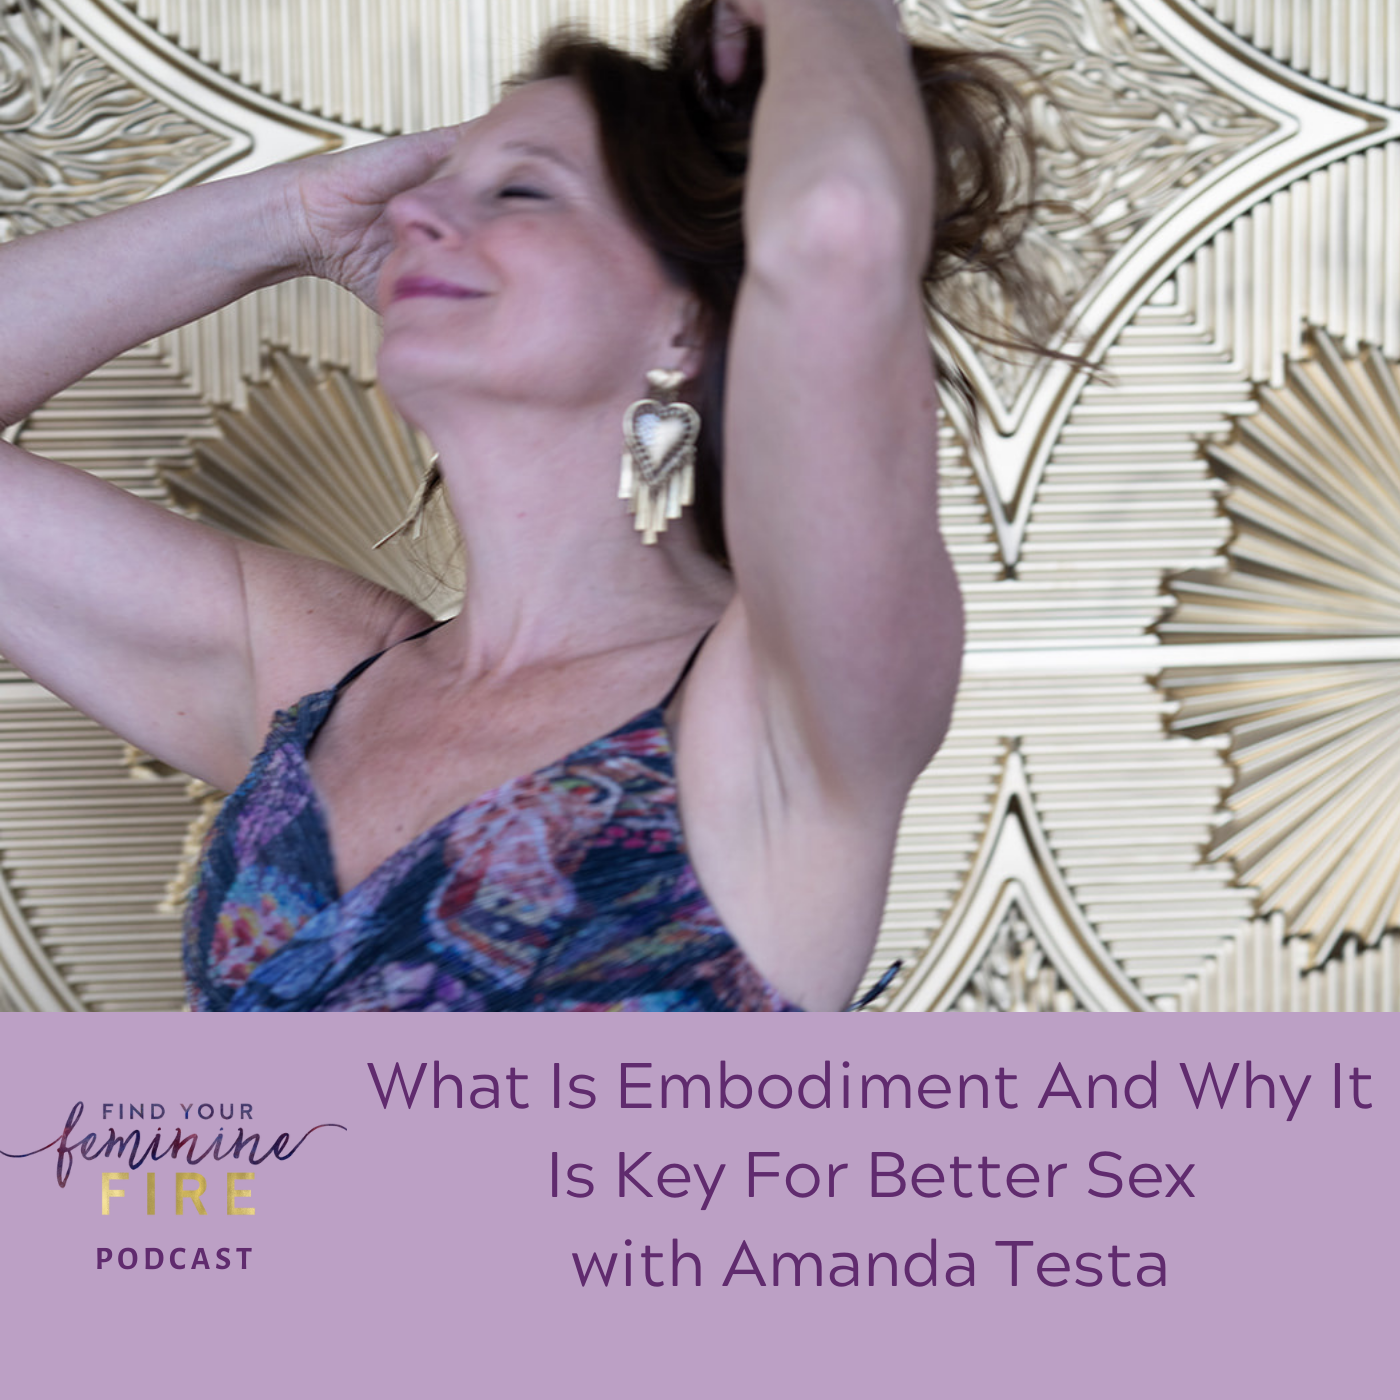 Why Is Embodiment Key For Better Sex? With Amanda Testa